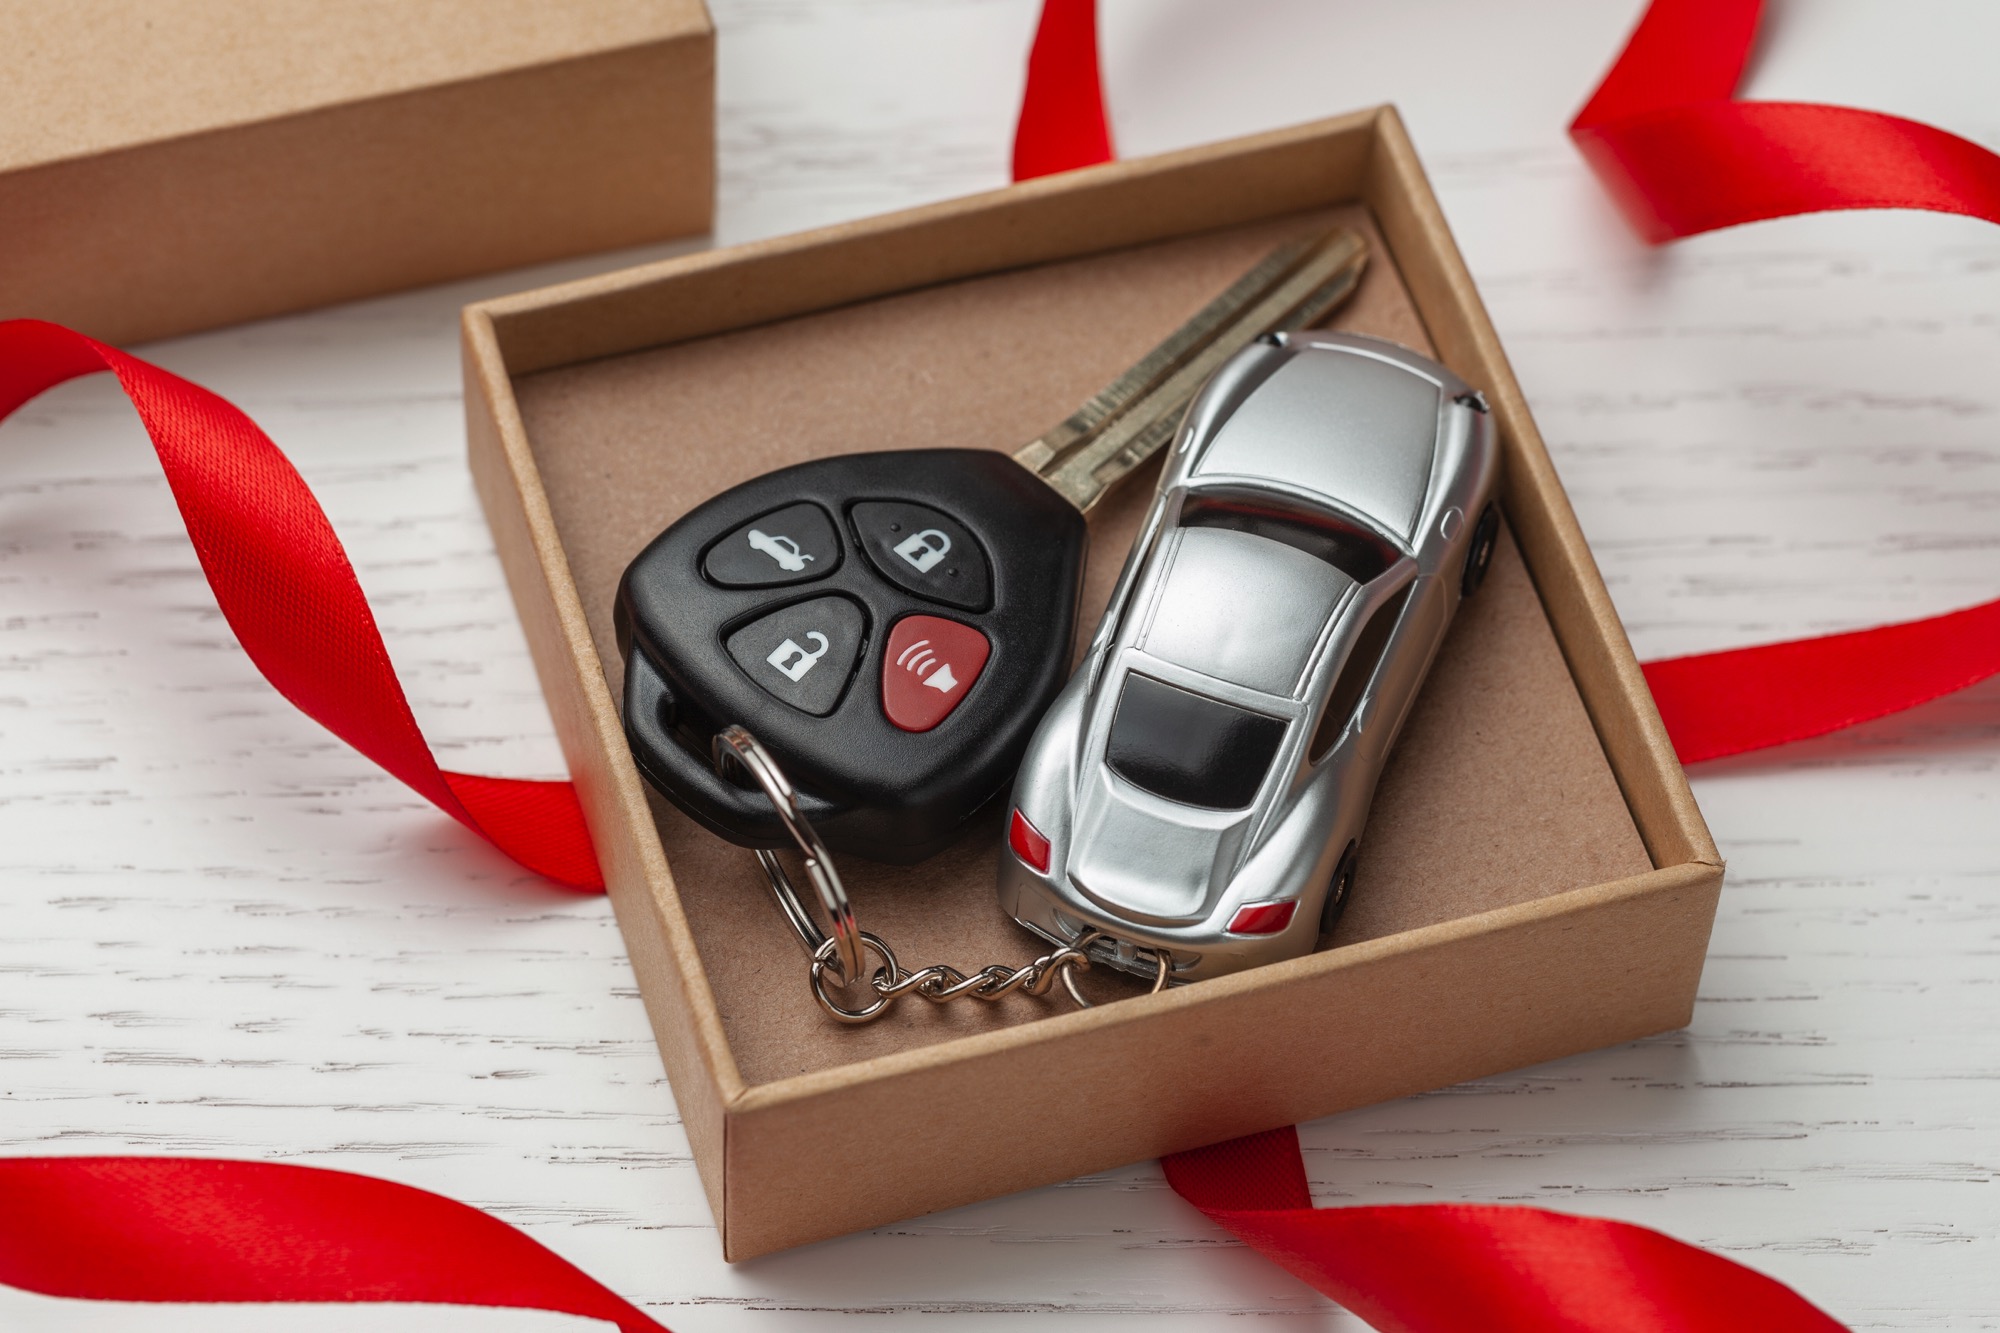 Where To Look For Your Lost Automotive Keys